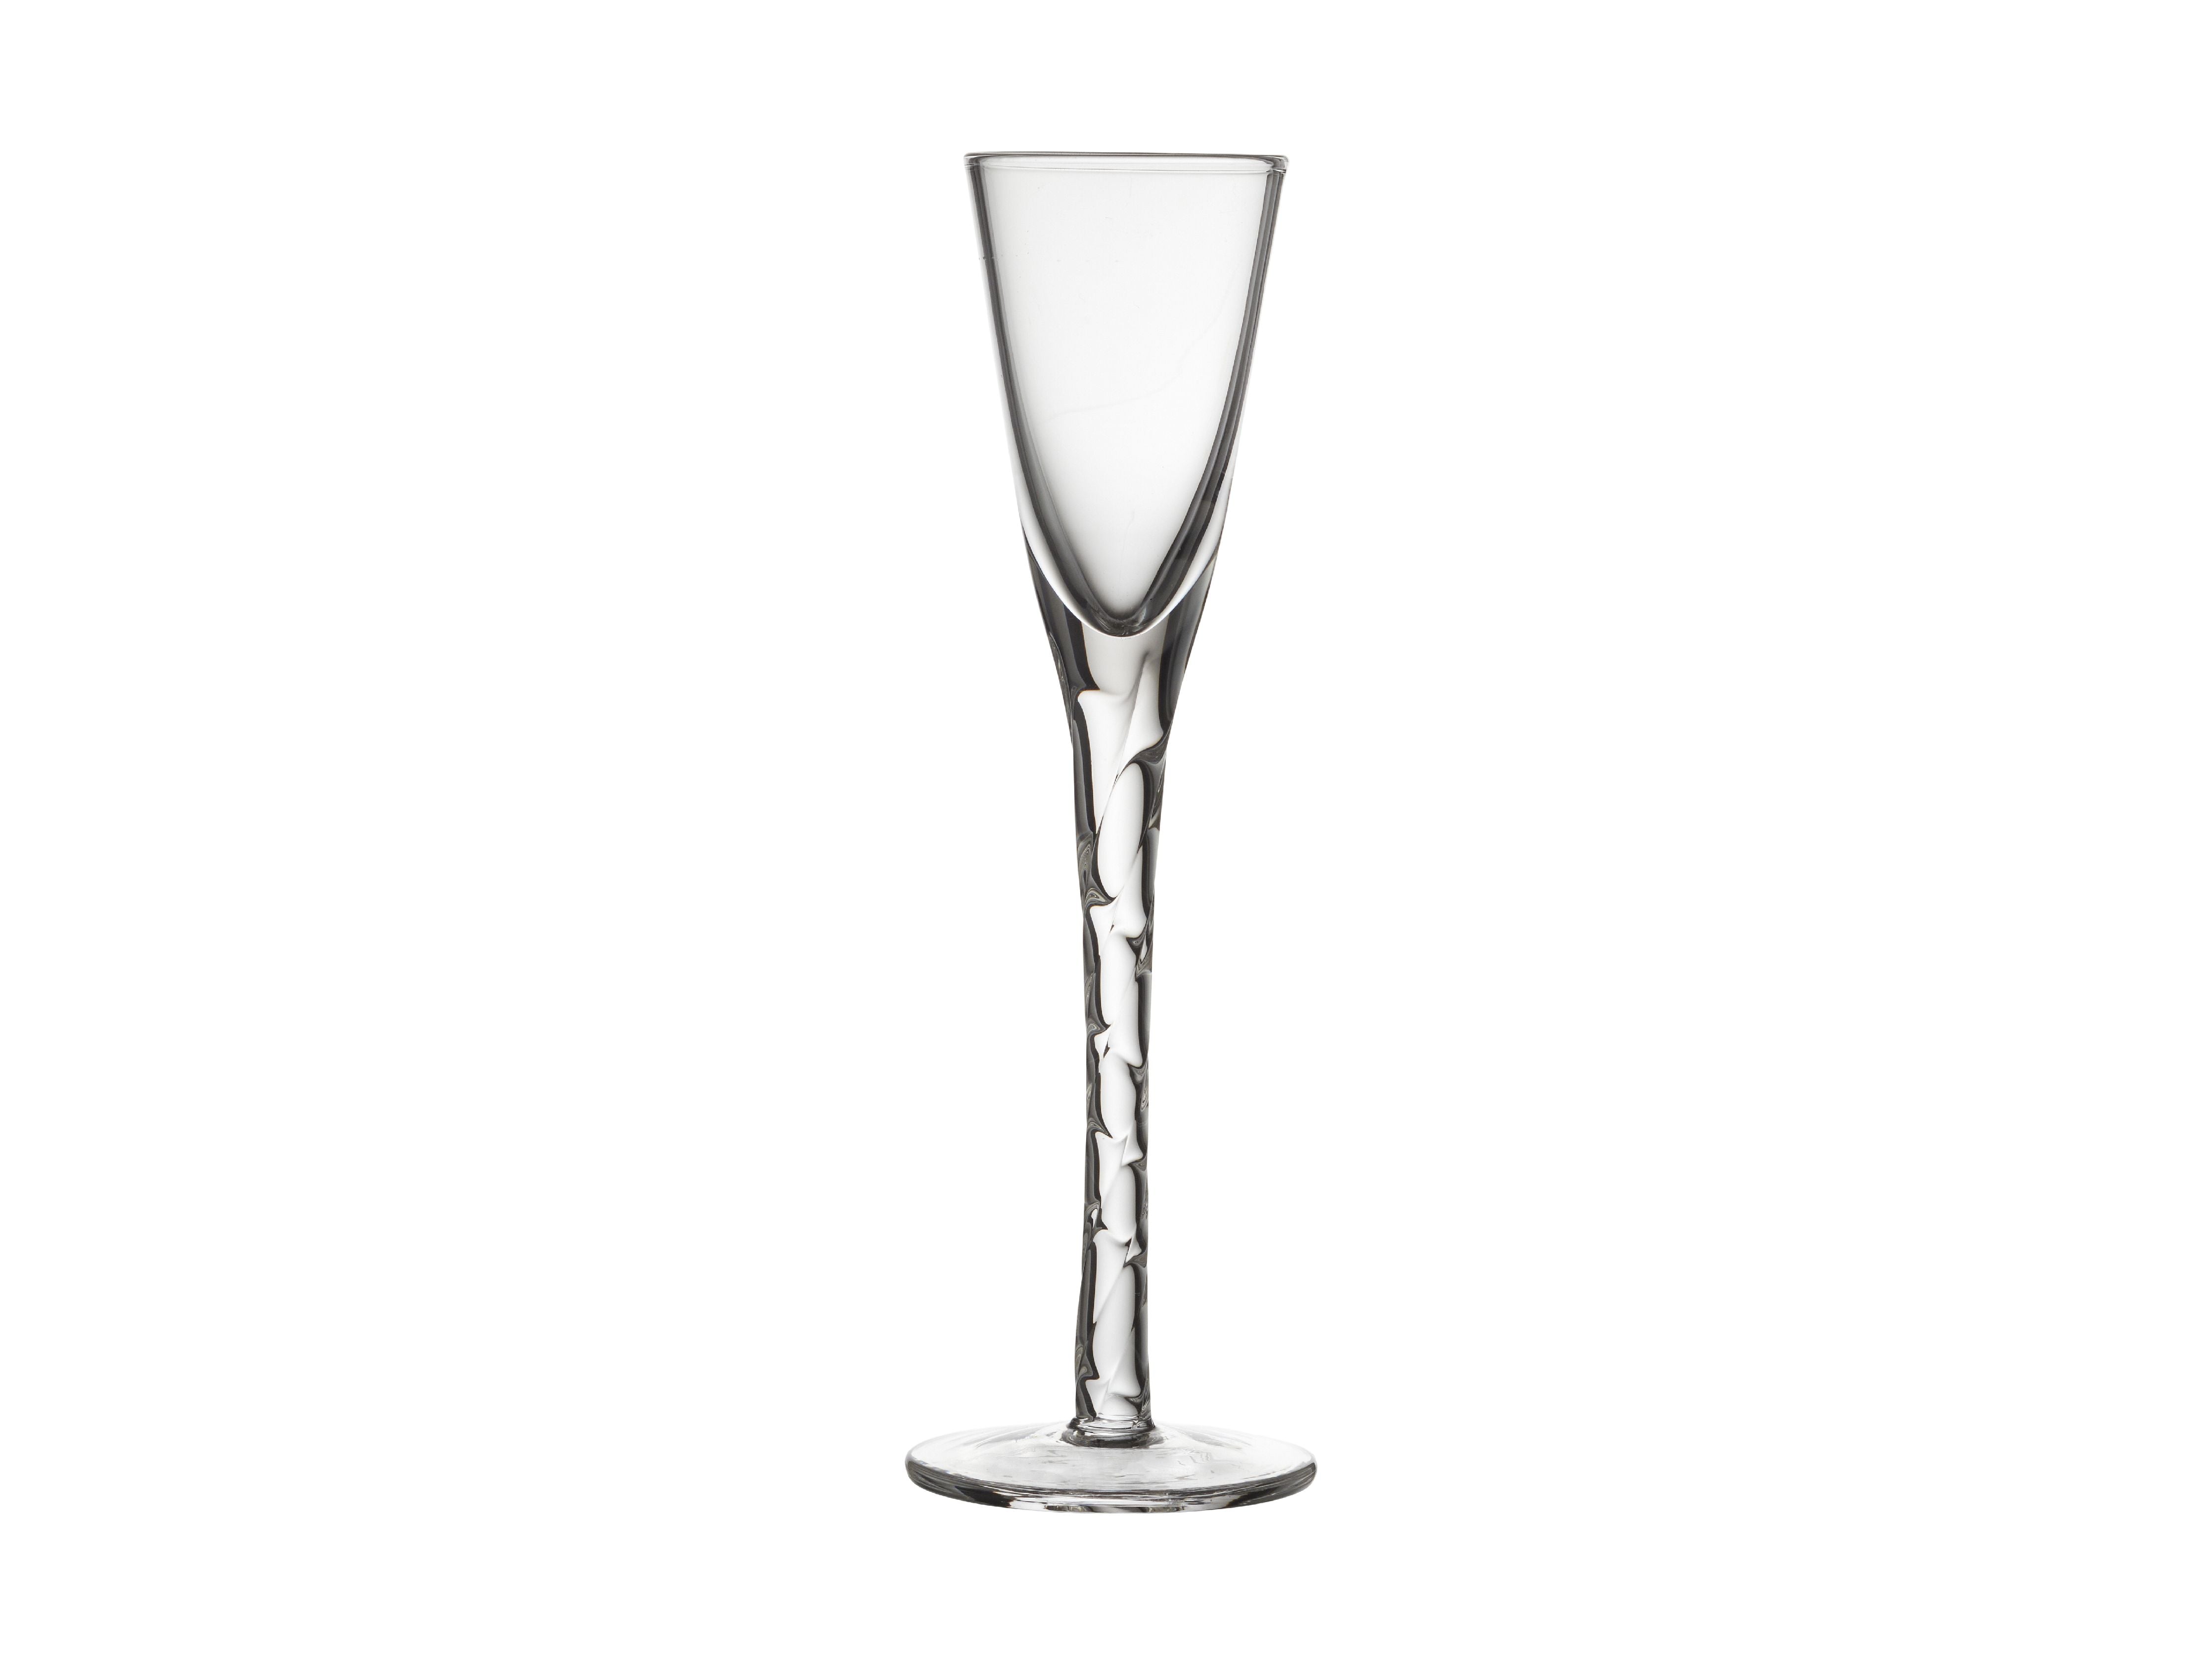 Lyngby Glas Paris Snap Glass Set Of 6, Clear